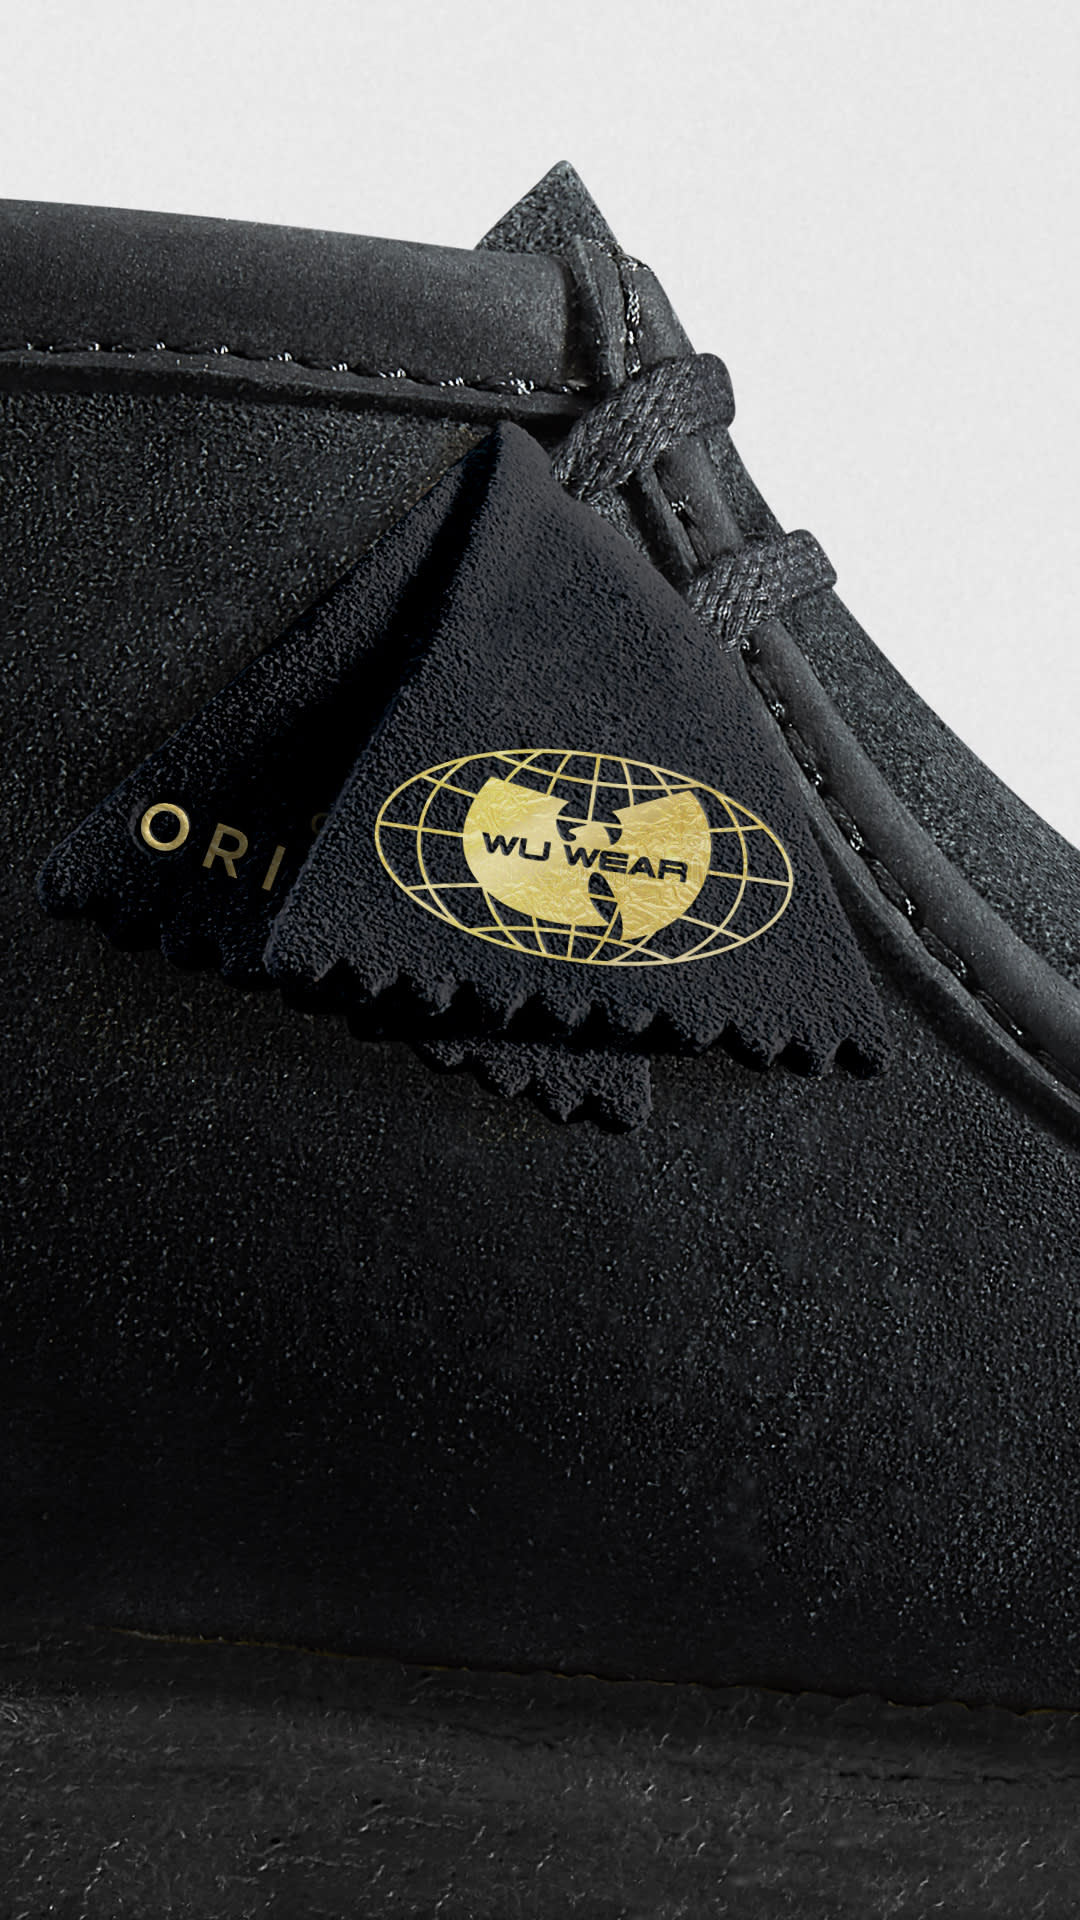 Clarks Finally Does The Wallabee Wu-Tang Clan Collab That We've Been  Waiting For…Forever! - The Source